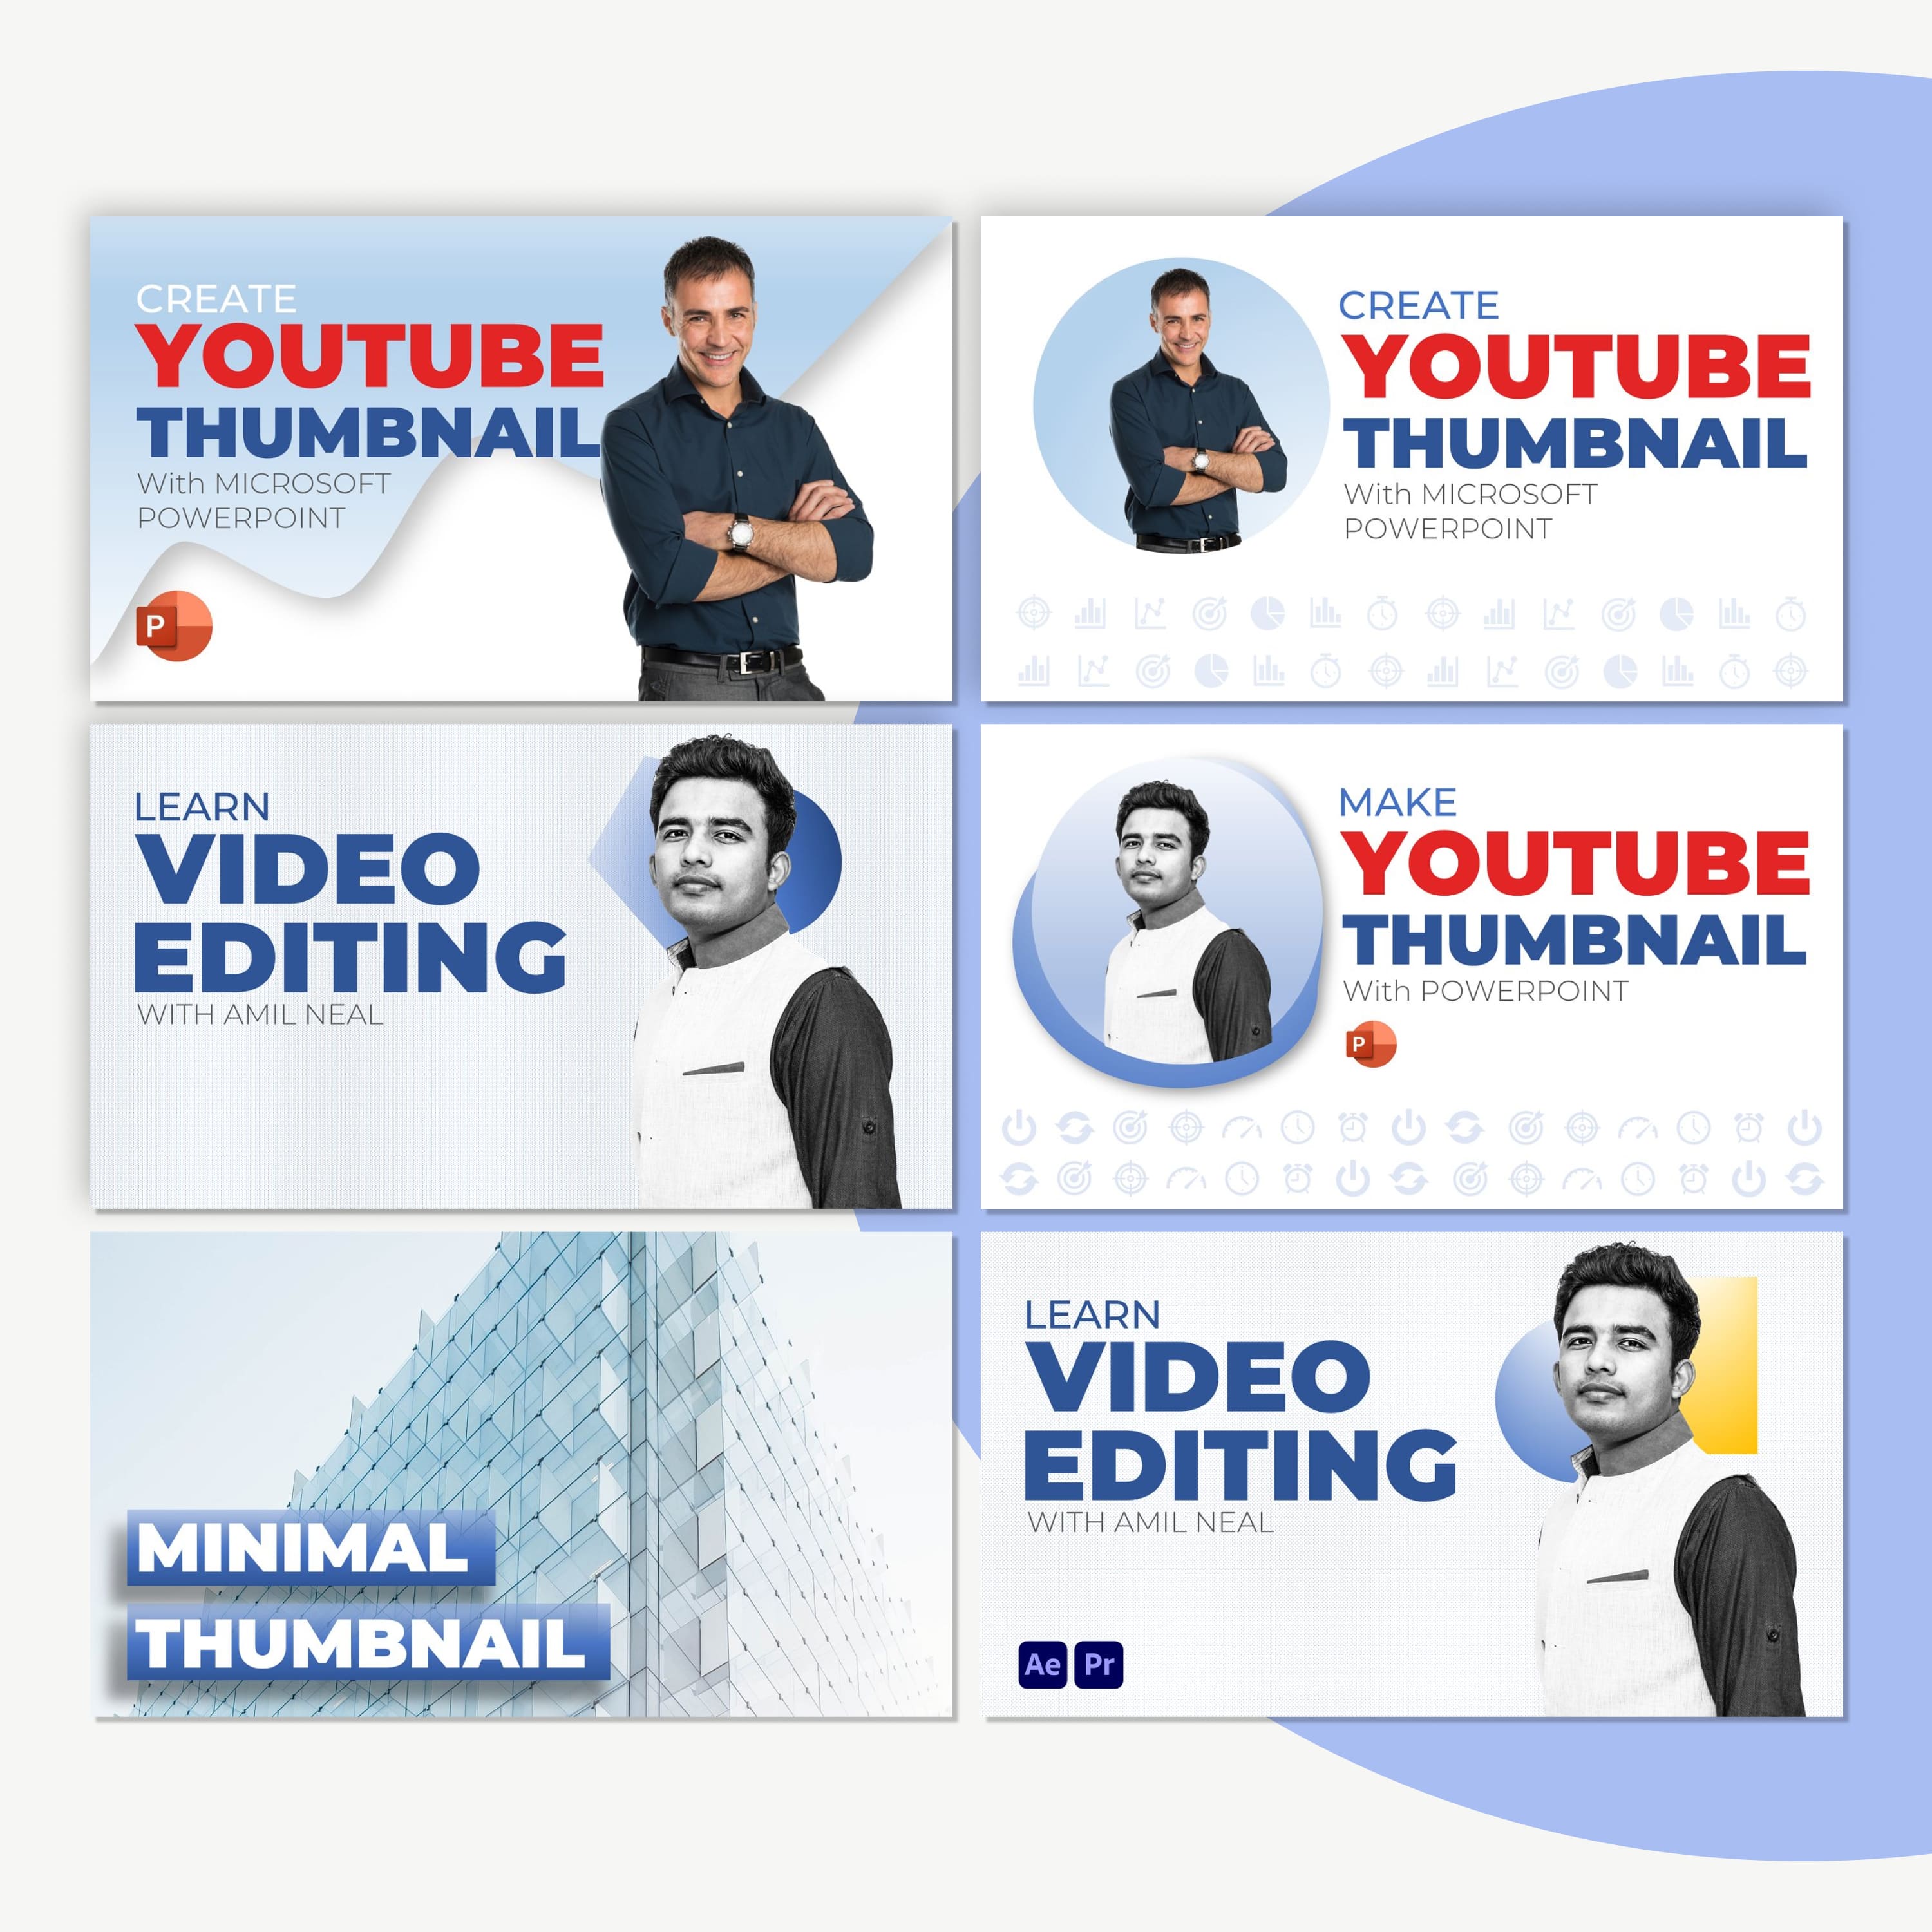 Youtube Thumbnails with PowerPoint cover.